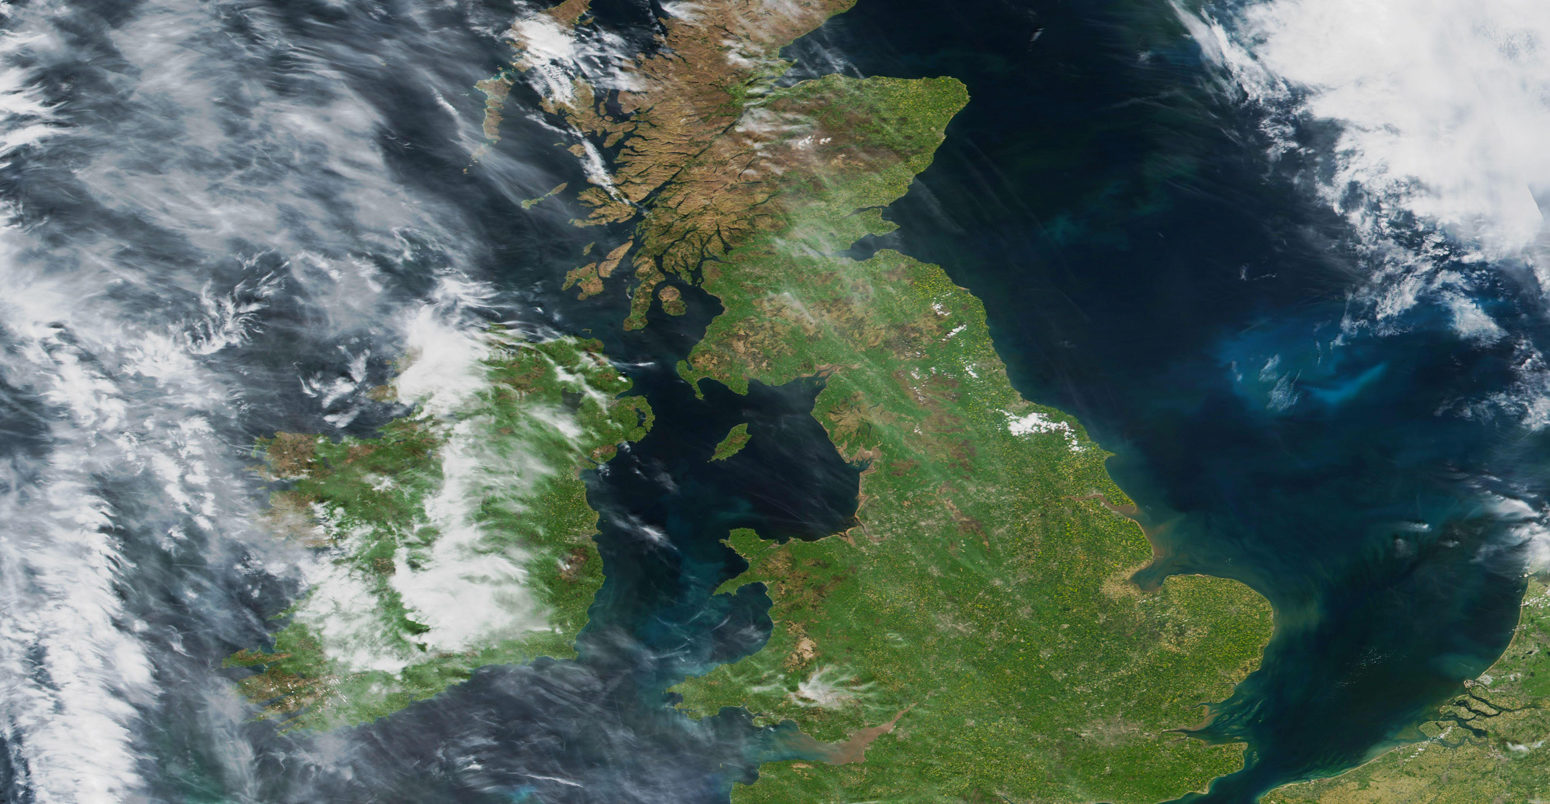 View of the British Isles from space